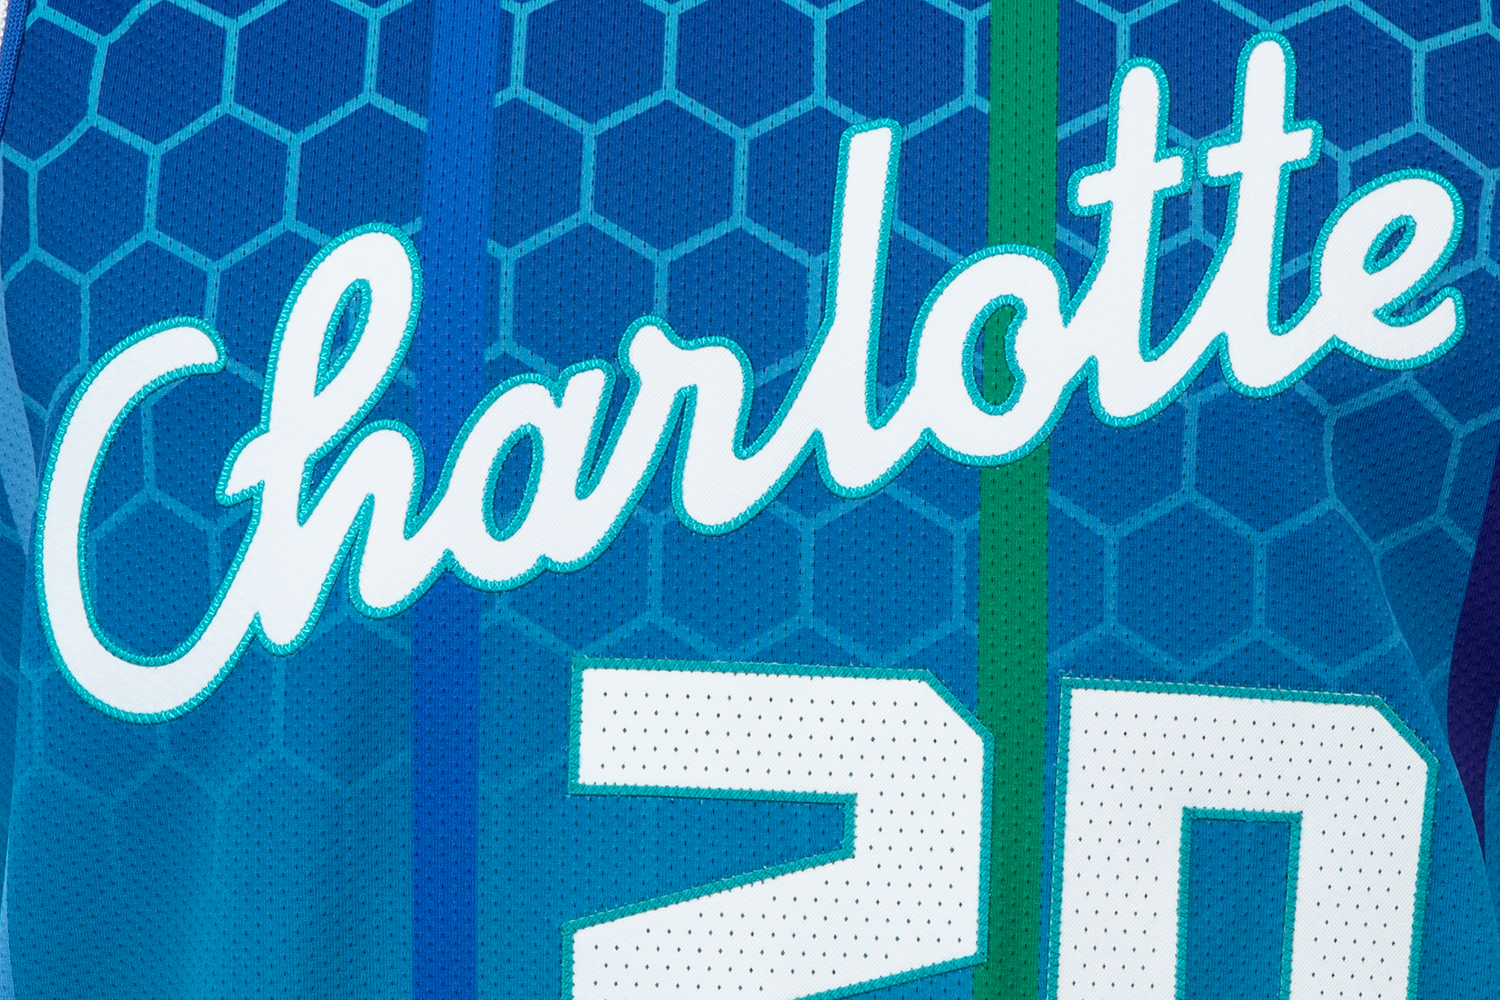 Charlotte Hornets' City Edition uniform a mix of old and new - The Charlotte  Post